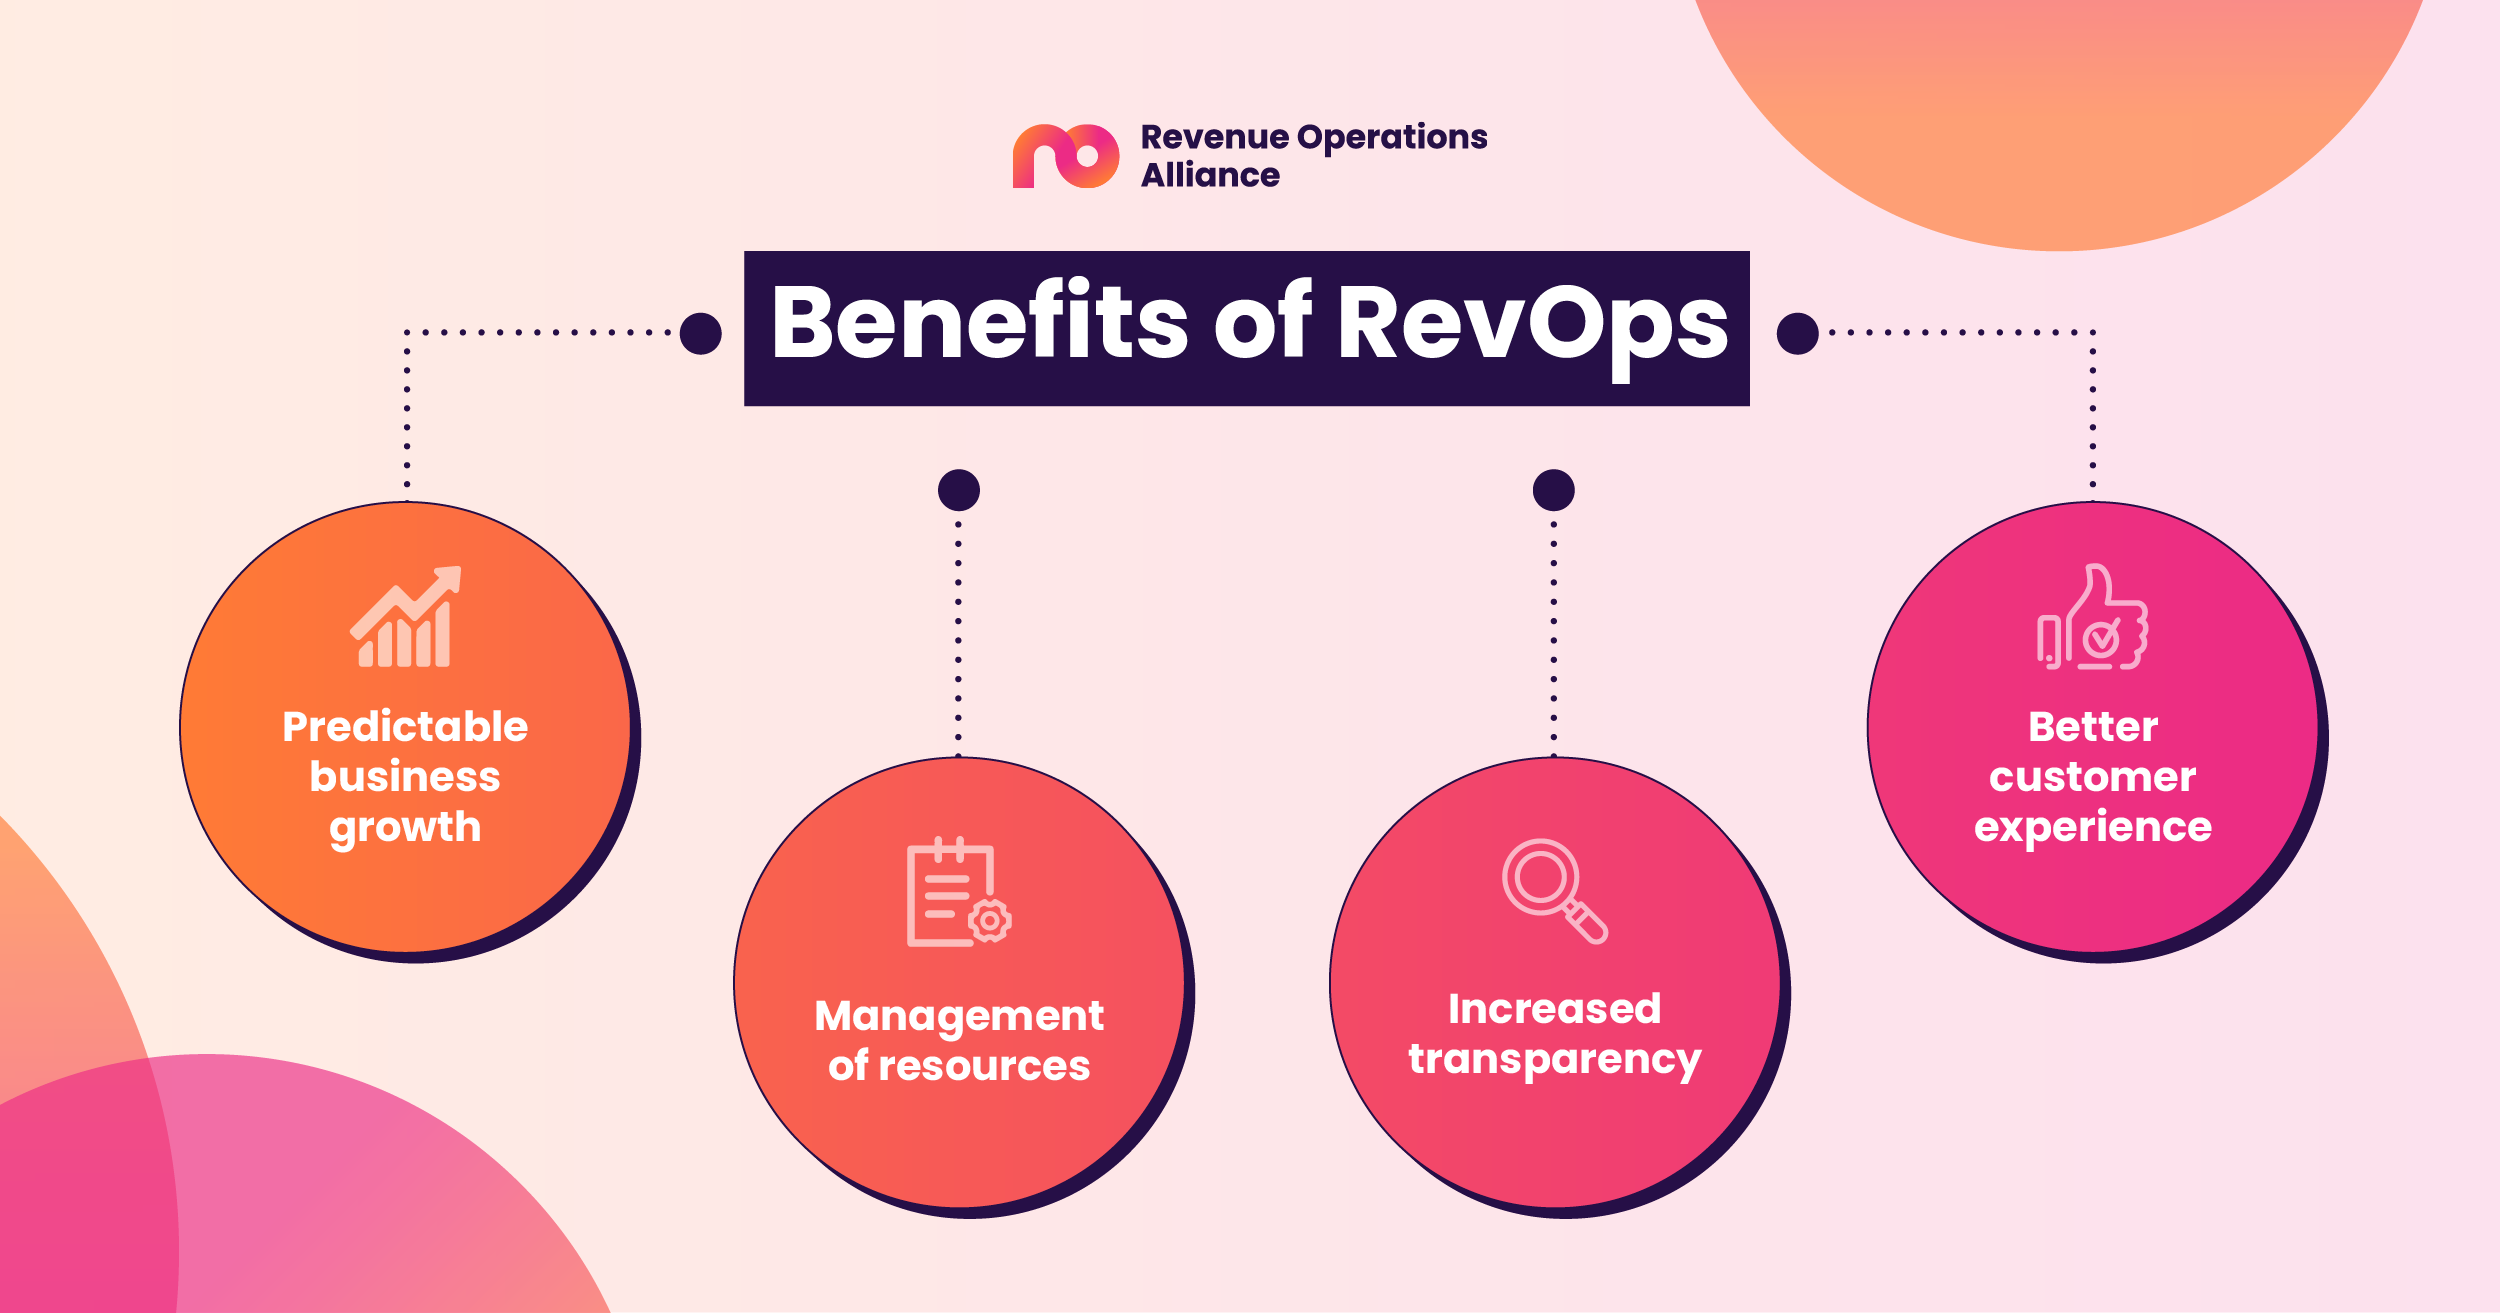 Benefits of RevOps: predictable business growth, management of resources, increased transparency, better customer experience